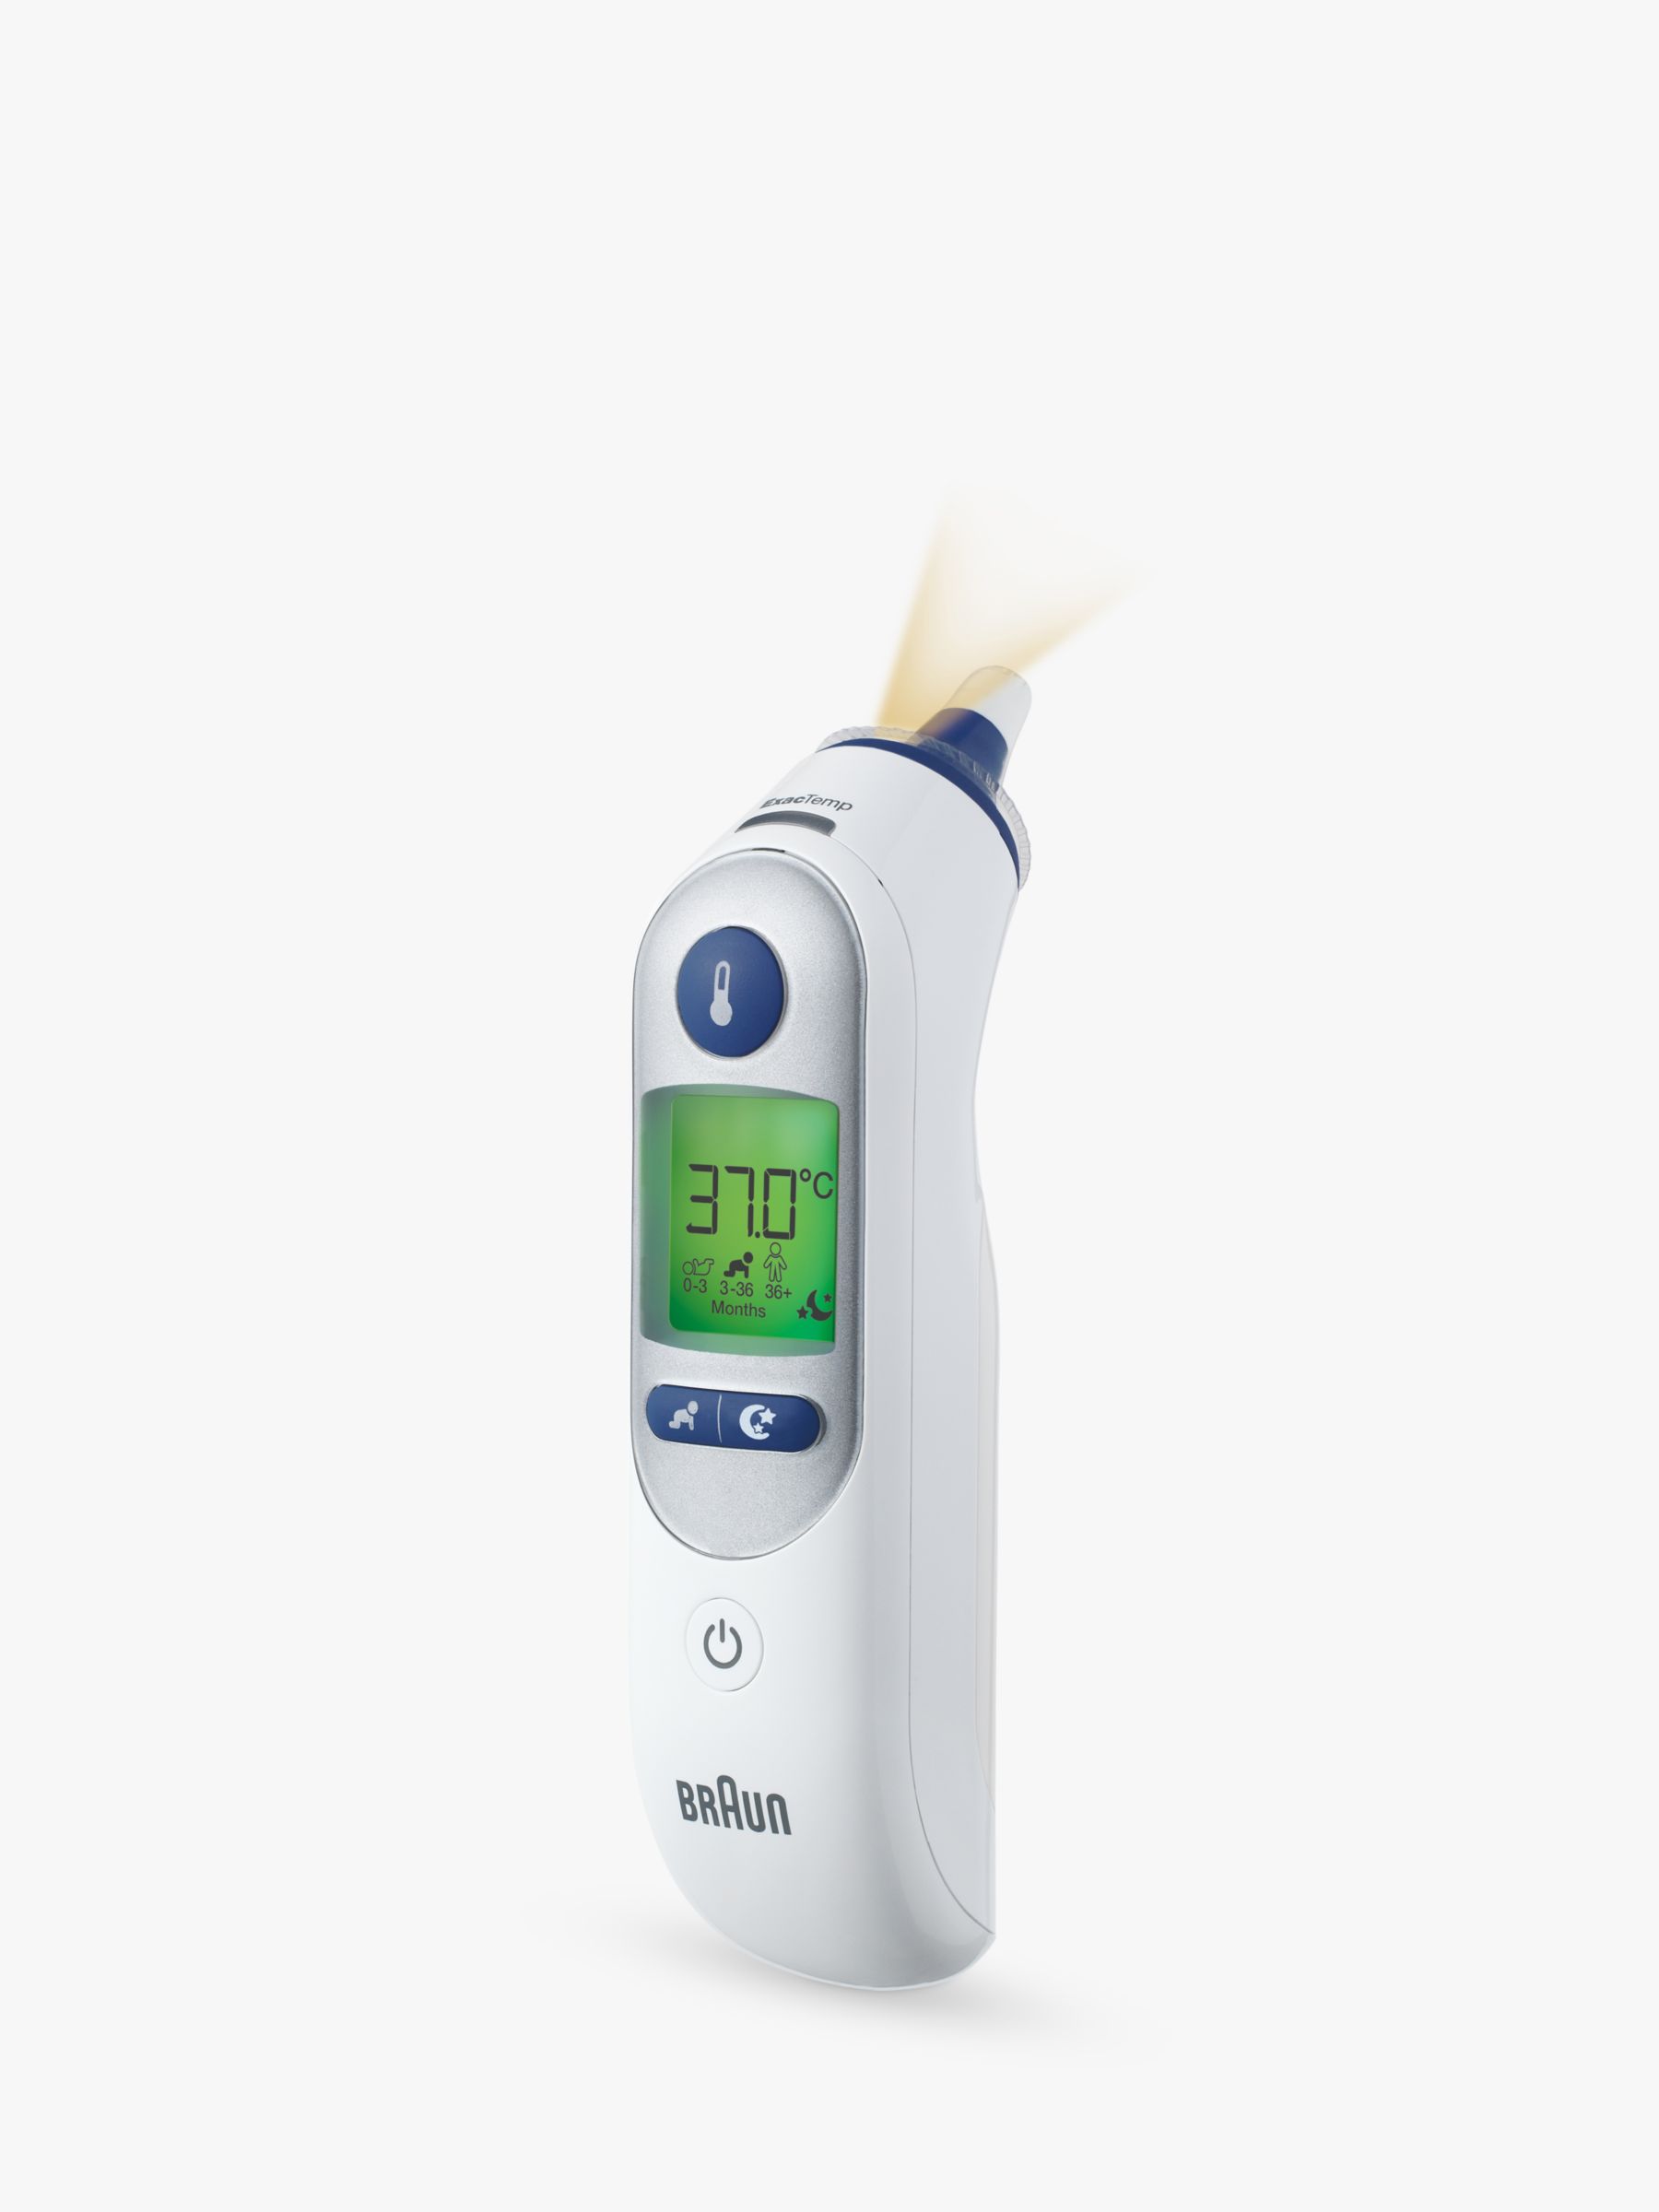 Braun Ear Thermometer Braun ThermoScan 7 - Age Precision Technology unisex